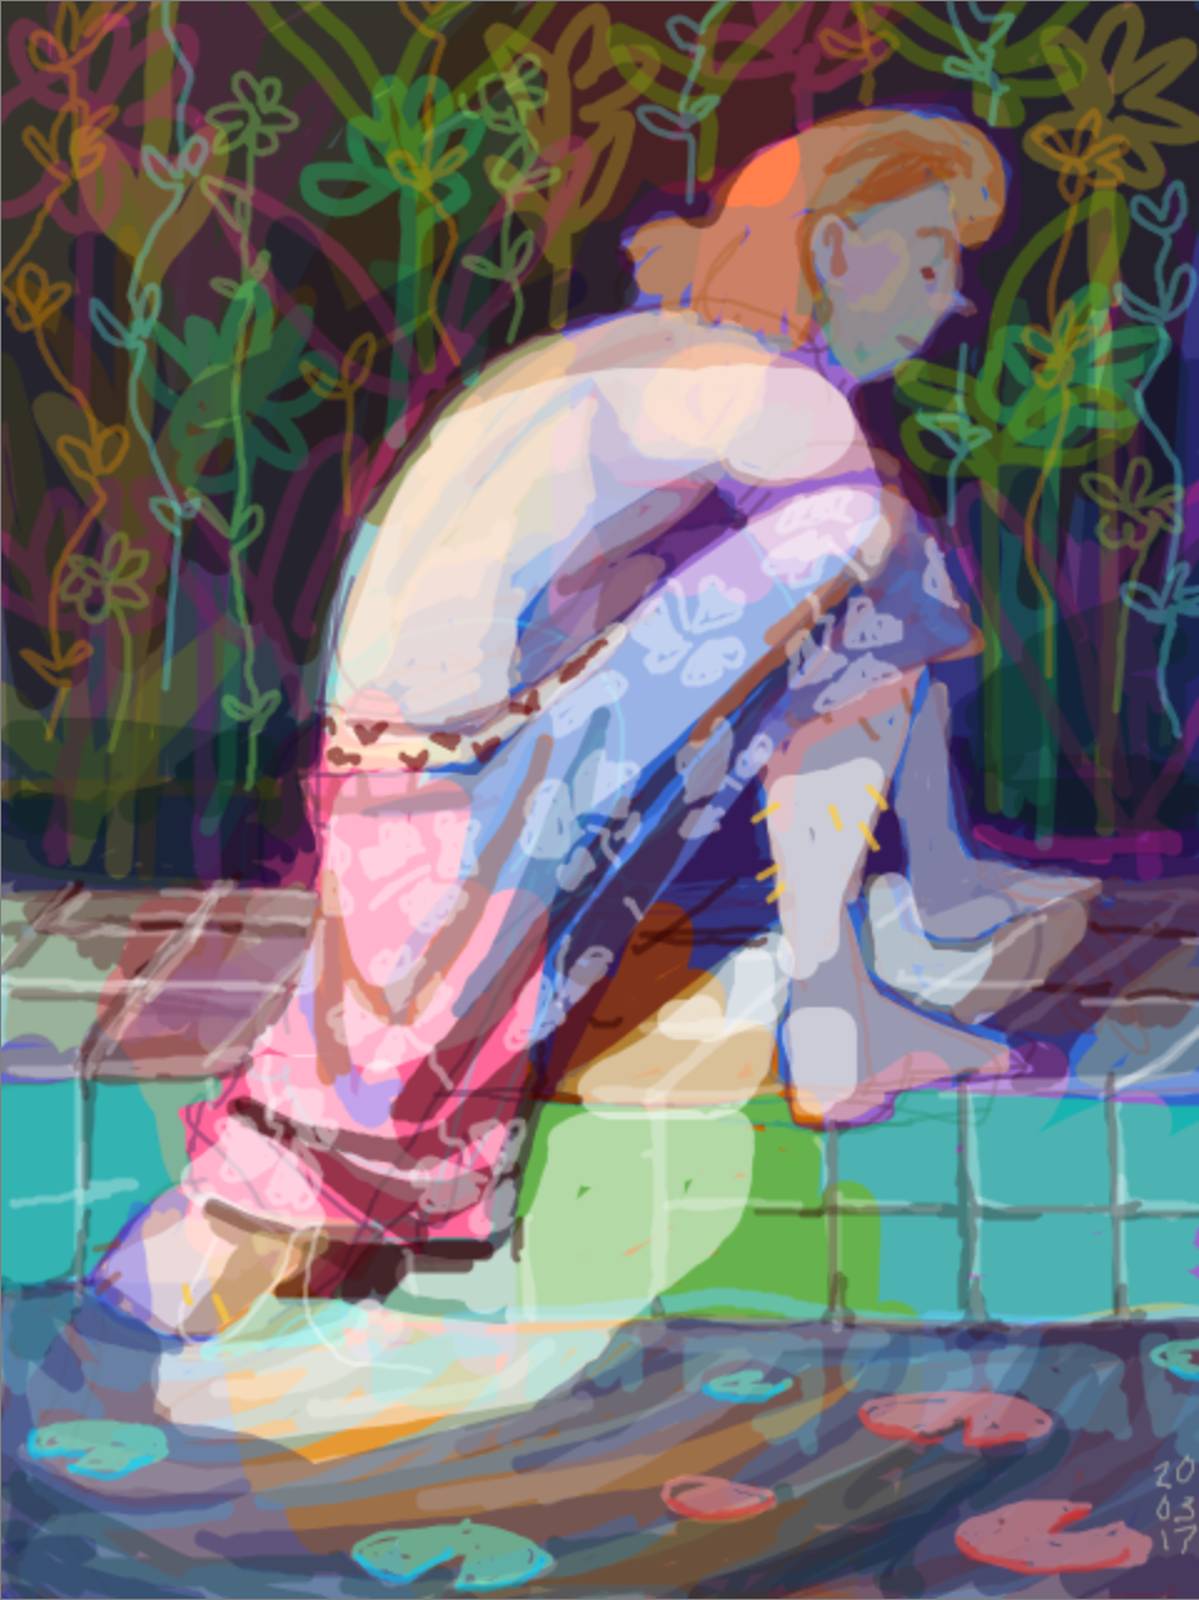 Tegaki drawing on someone in hawaii print shorts climbing out of an overgrown swimming pool into tall plants. There is a spotlight on them!?